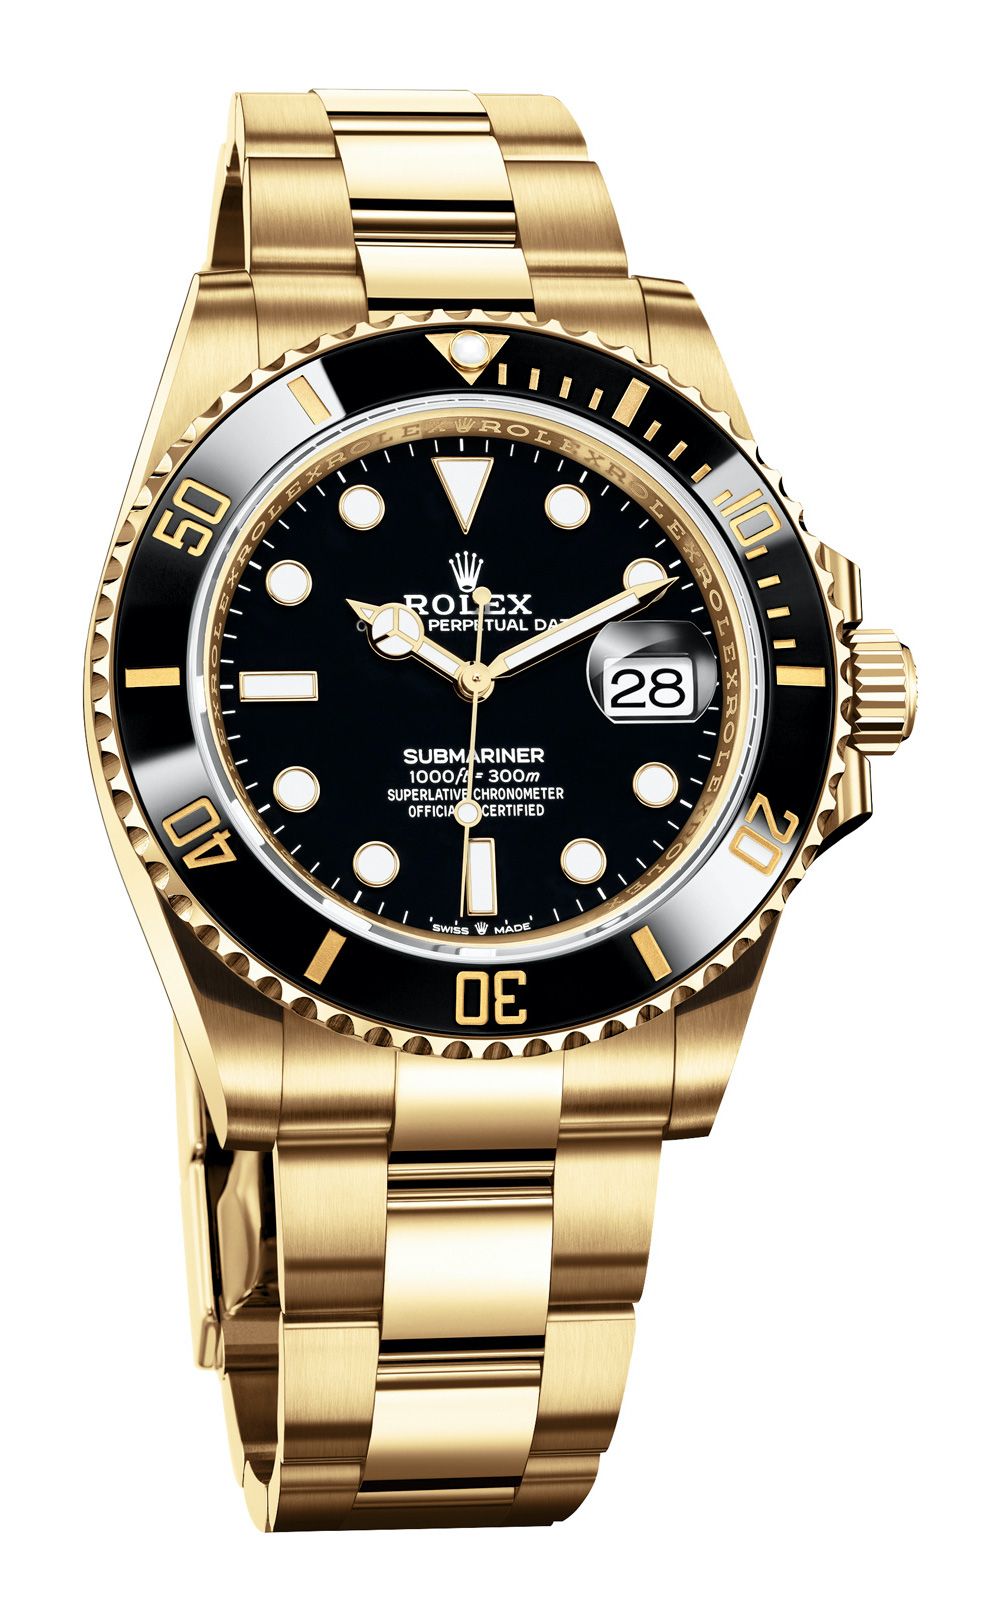 what is the price of rolex submariner